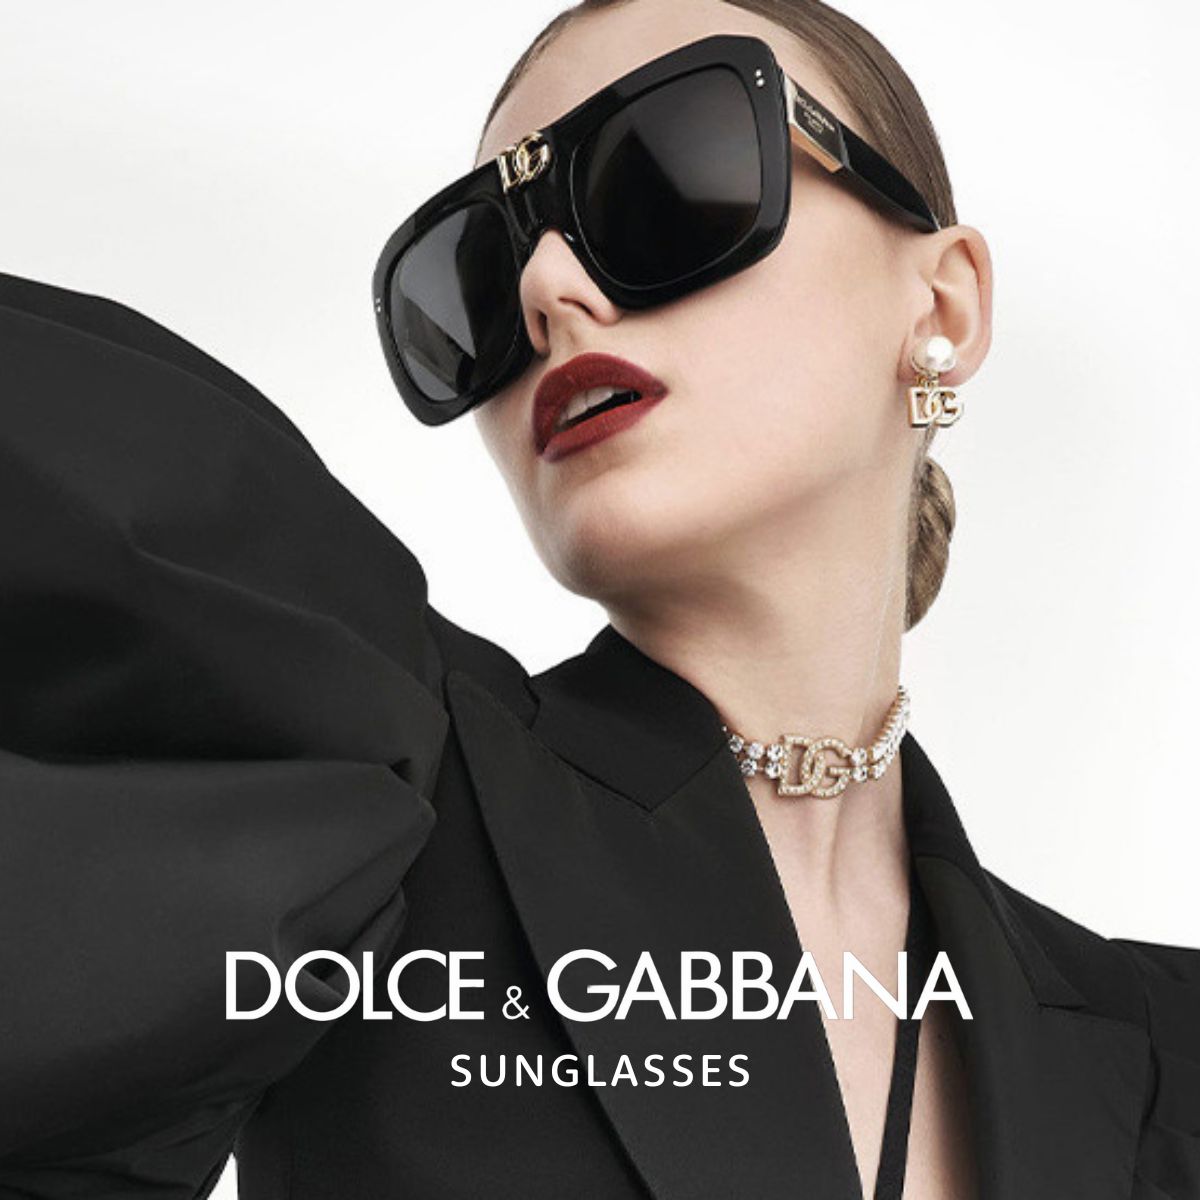 "Dolce & Gabbana sunglasses for all at Optorium."